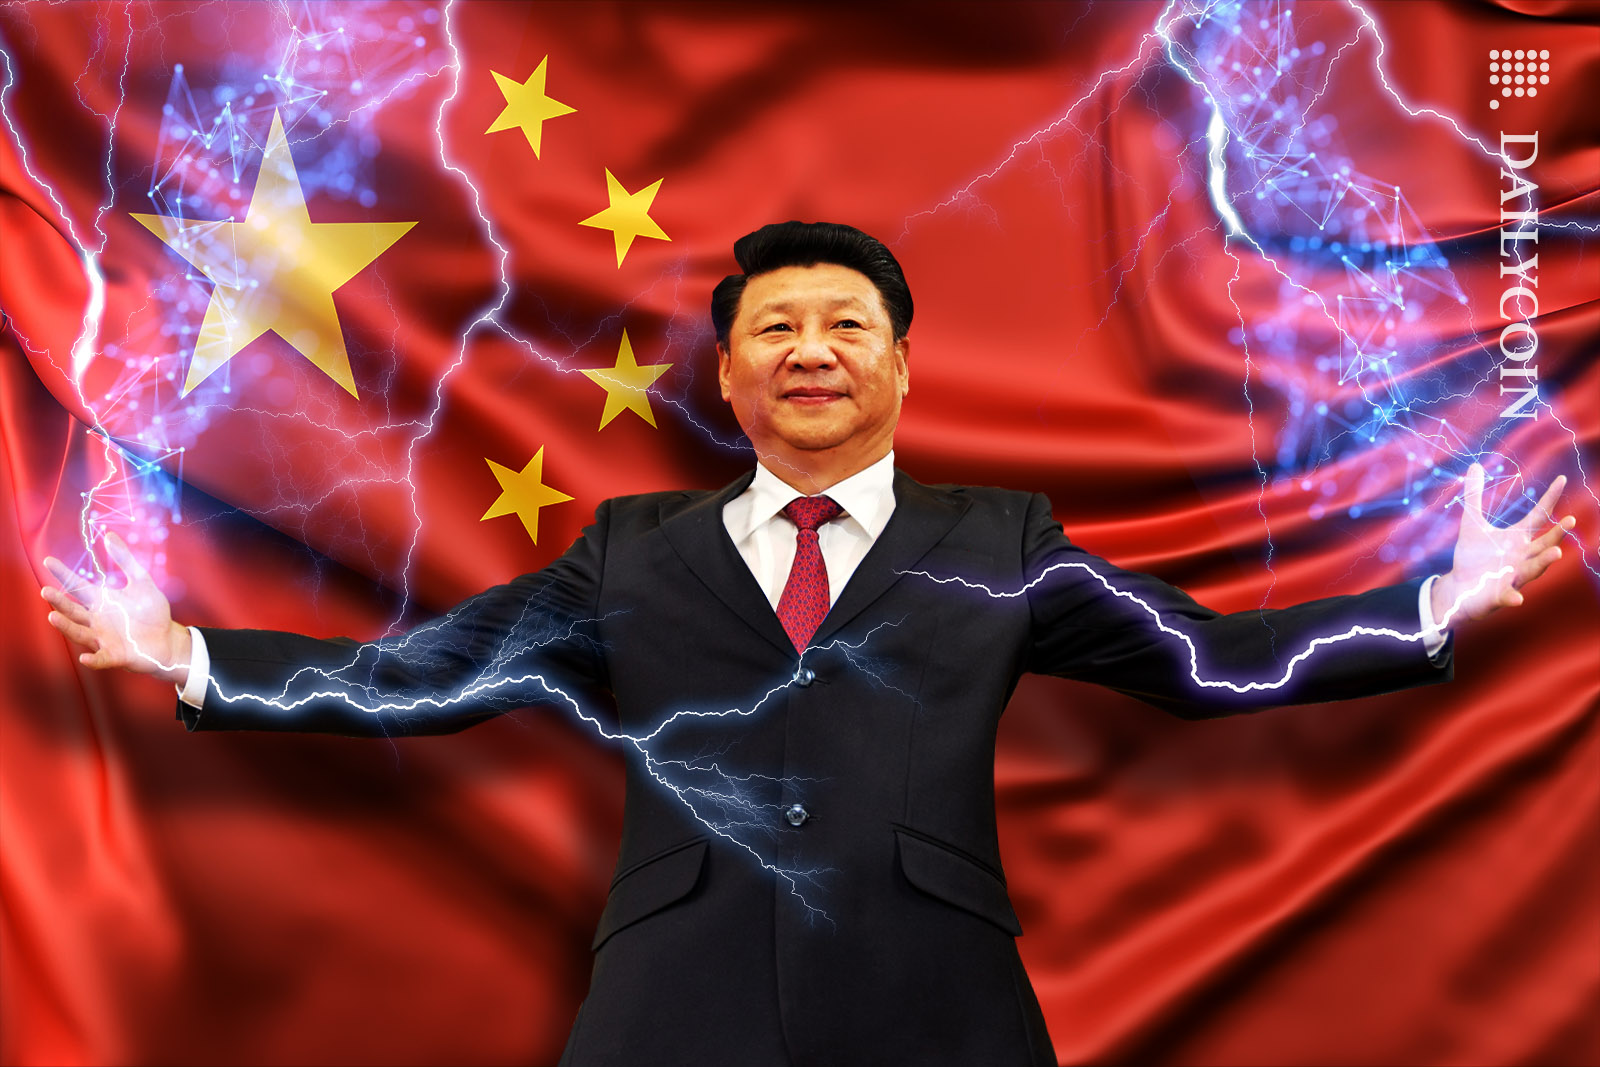 Xi Jinping with his arms out smiling, consuming blockchain energy through his hands from above.